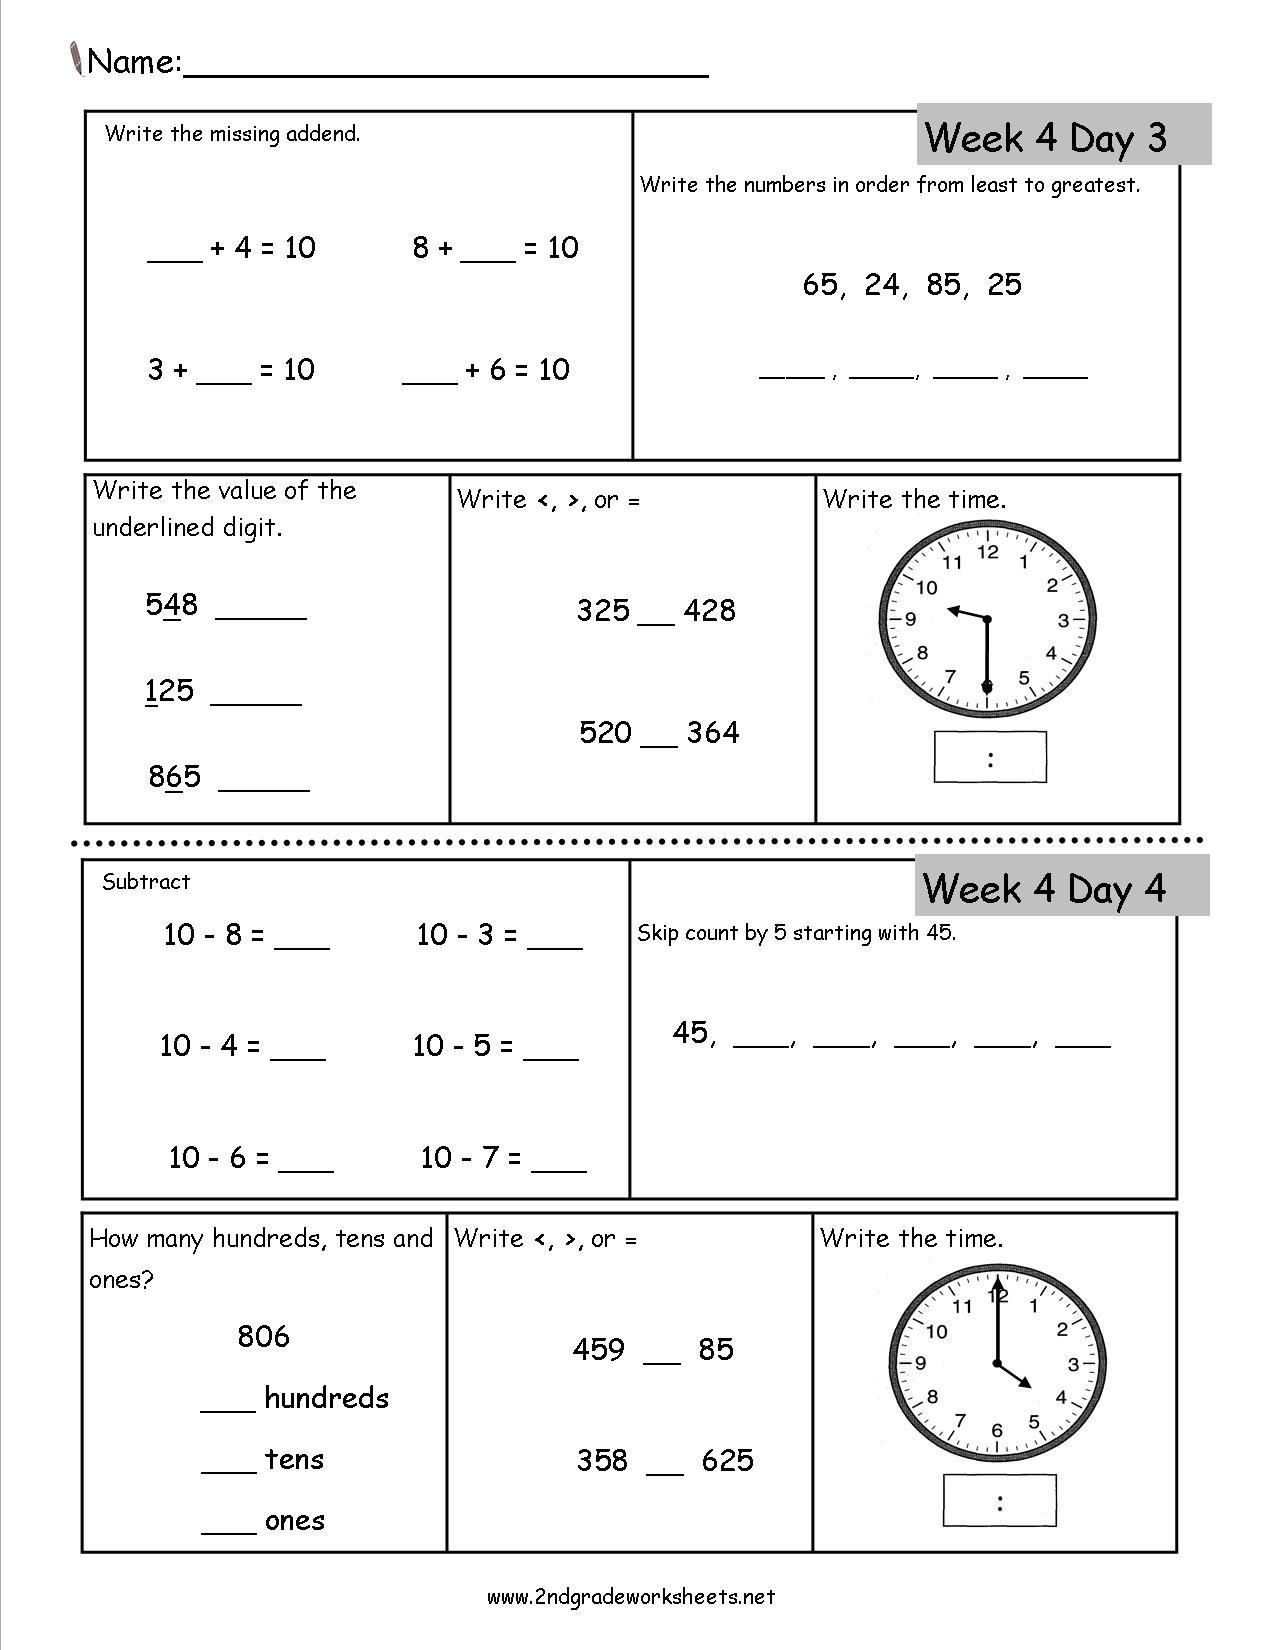 Free 2Nd Grade Daily Math Worksheets intended for Free Math Printables For 2Nd Grade